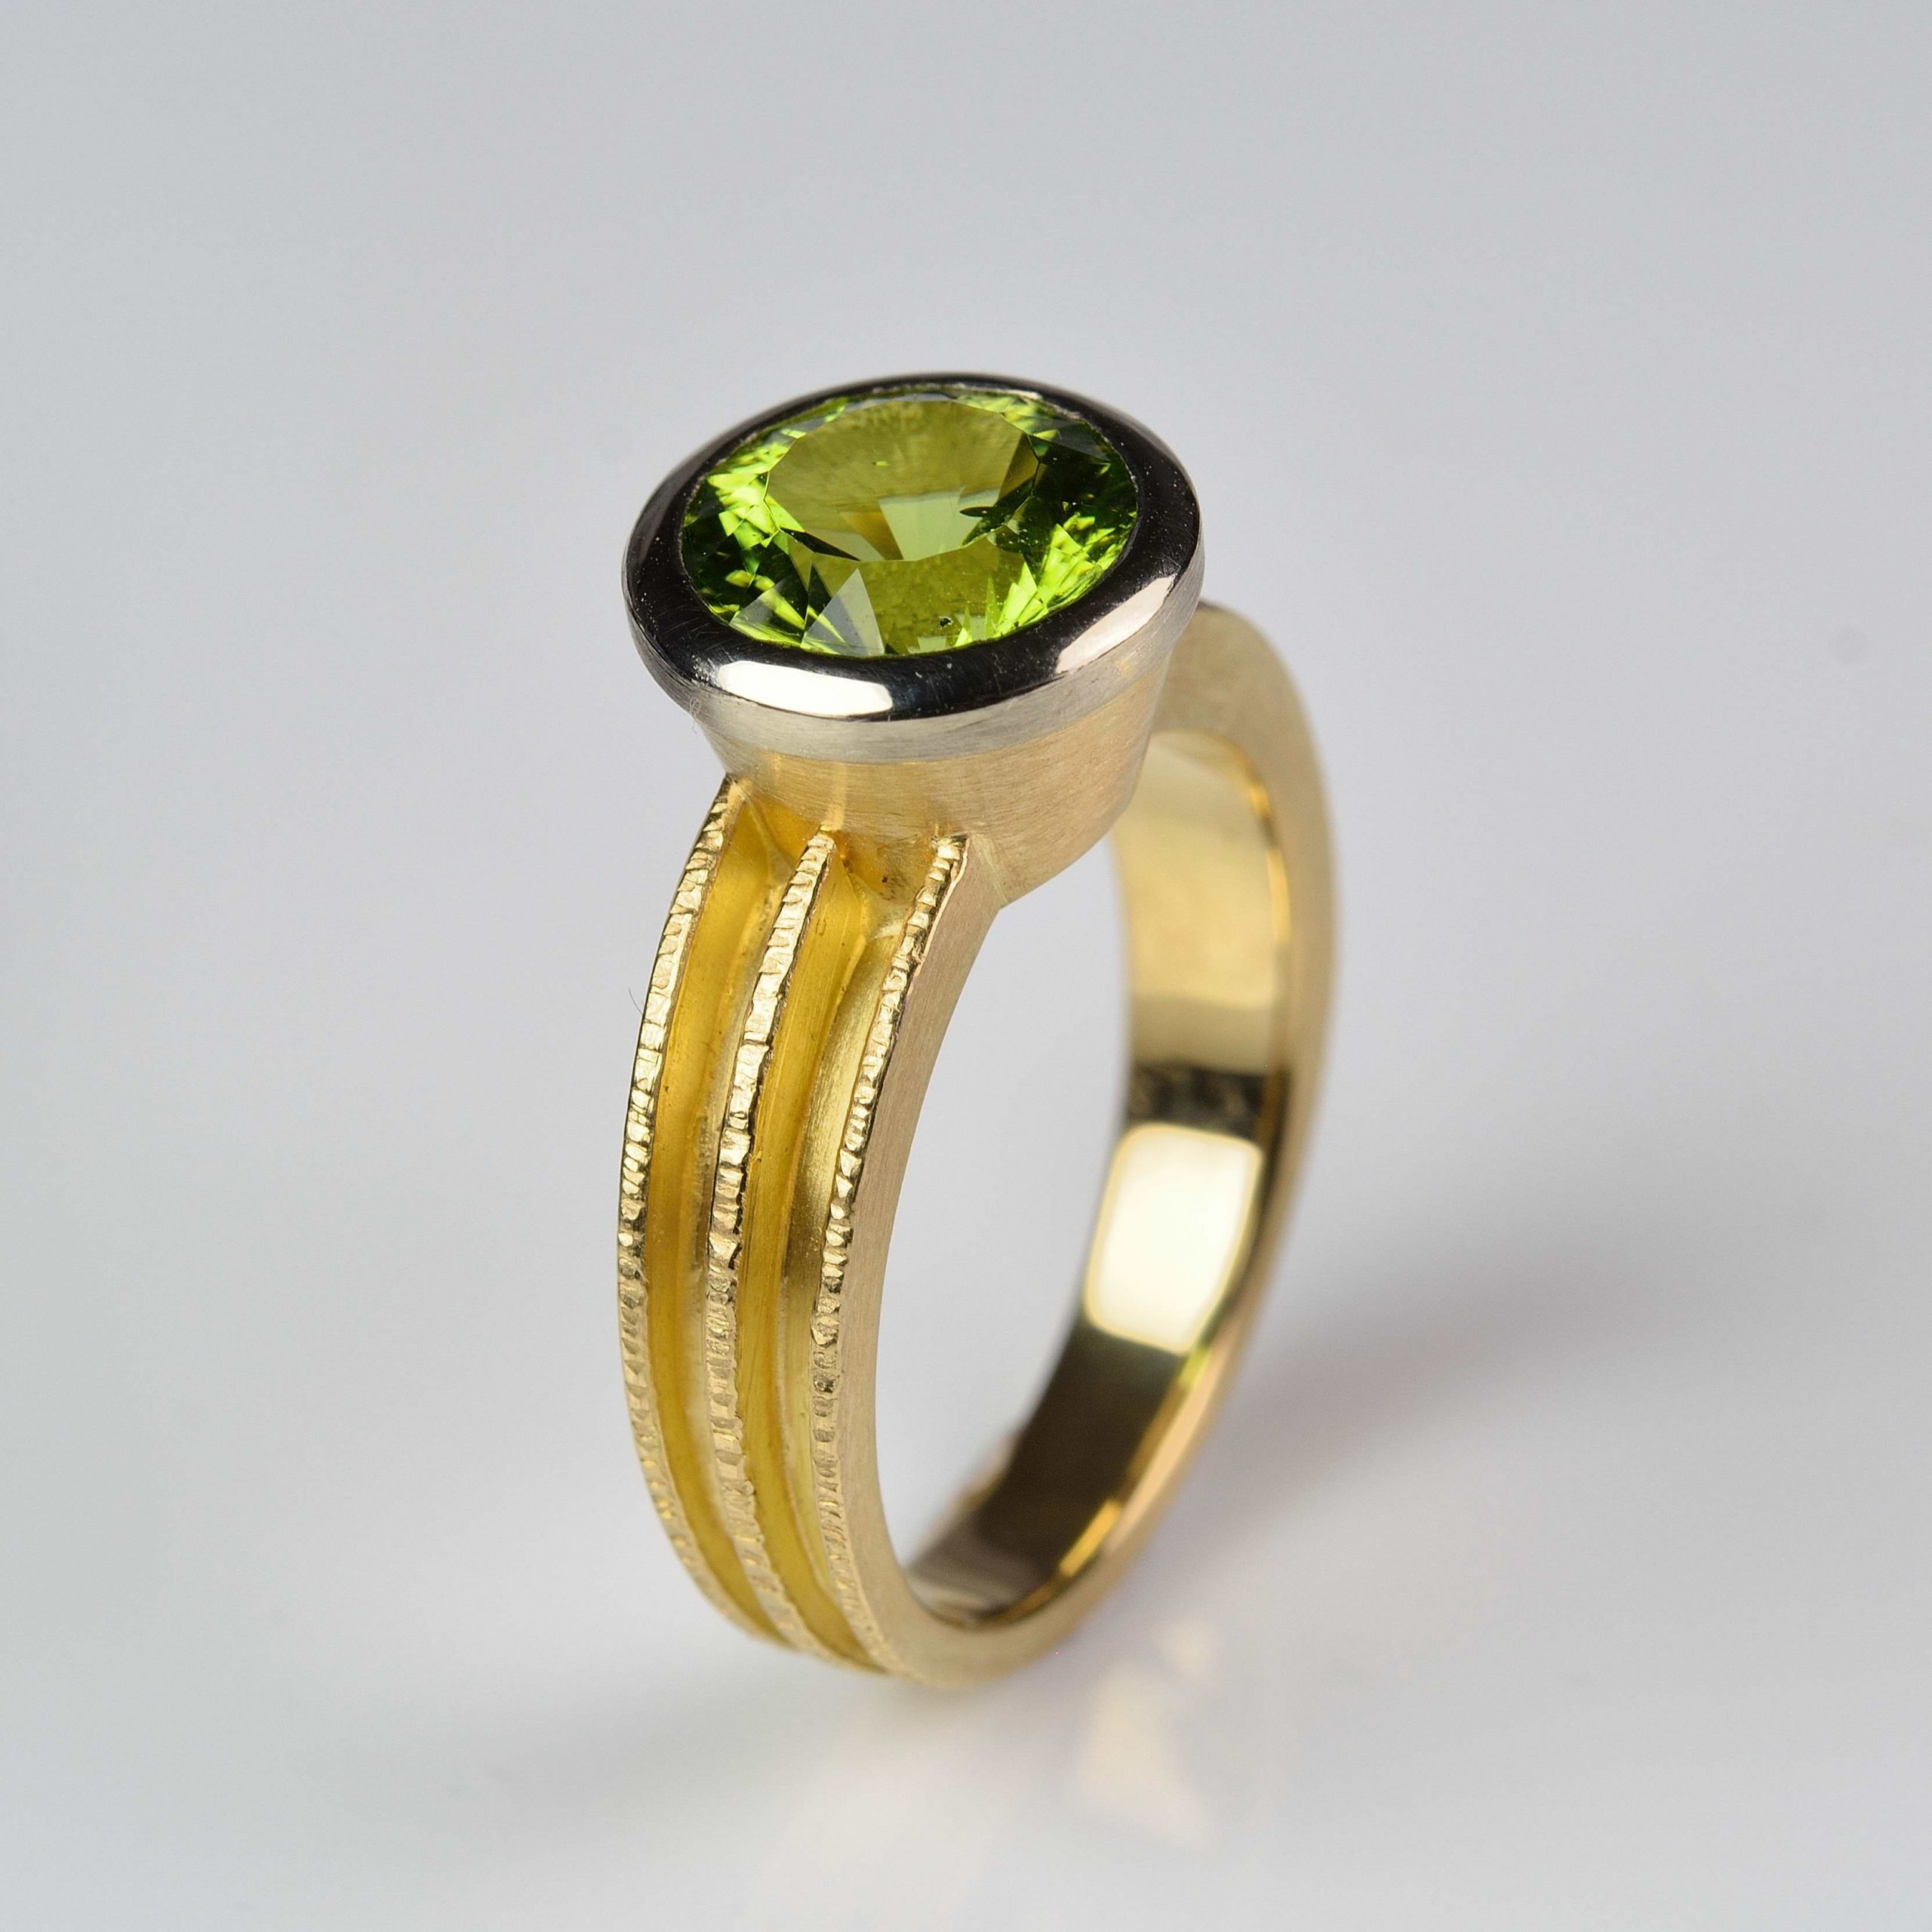 18ct yellow and white gold ring with peridot